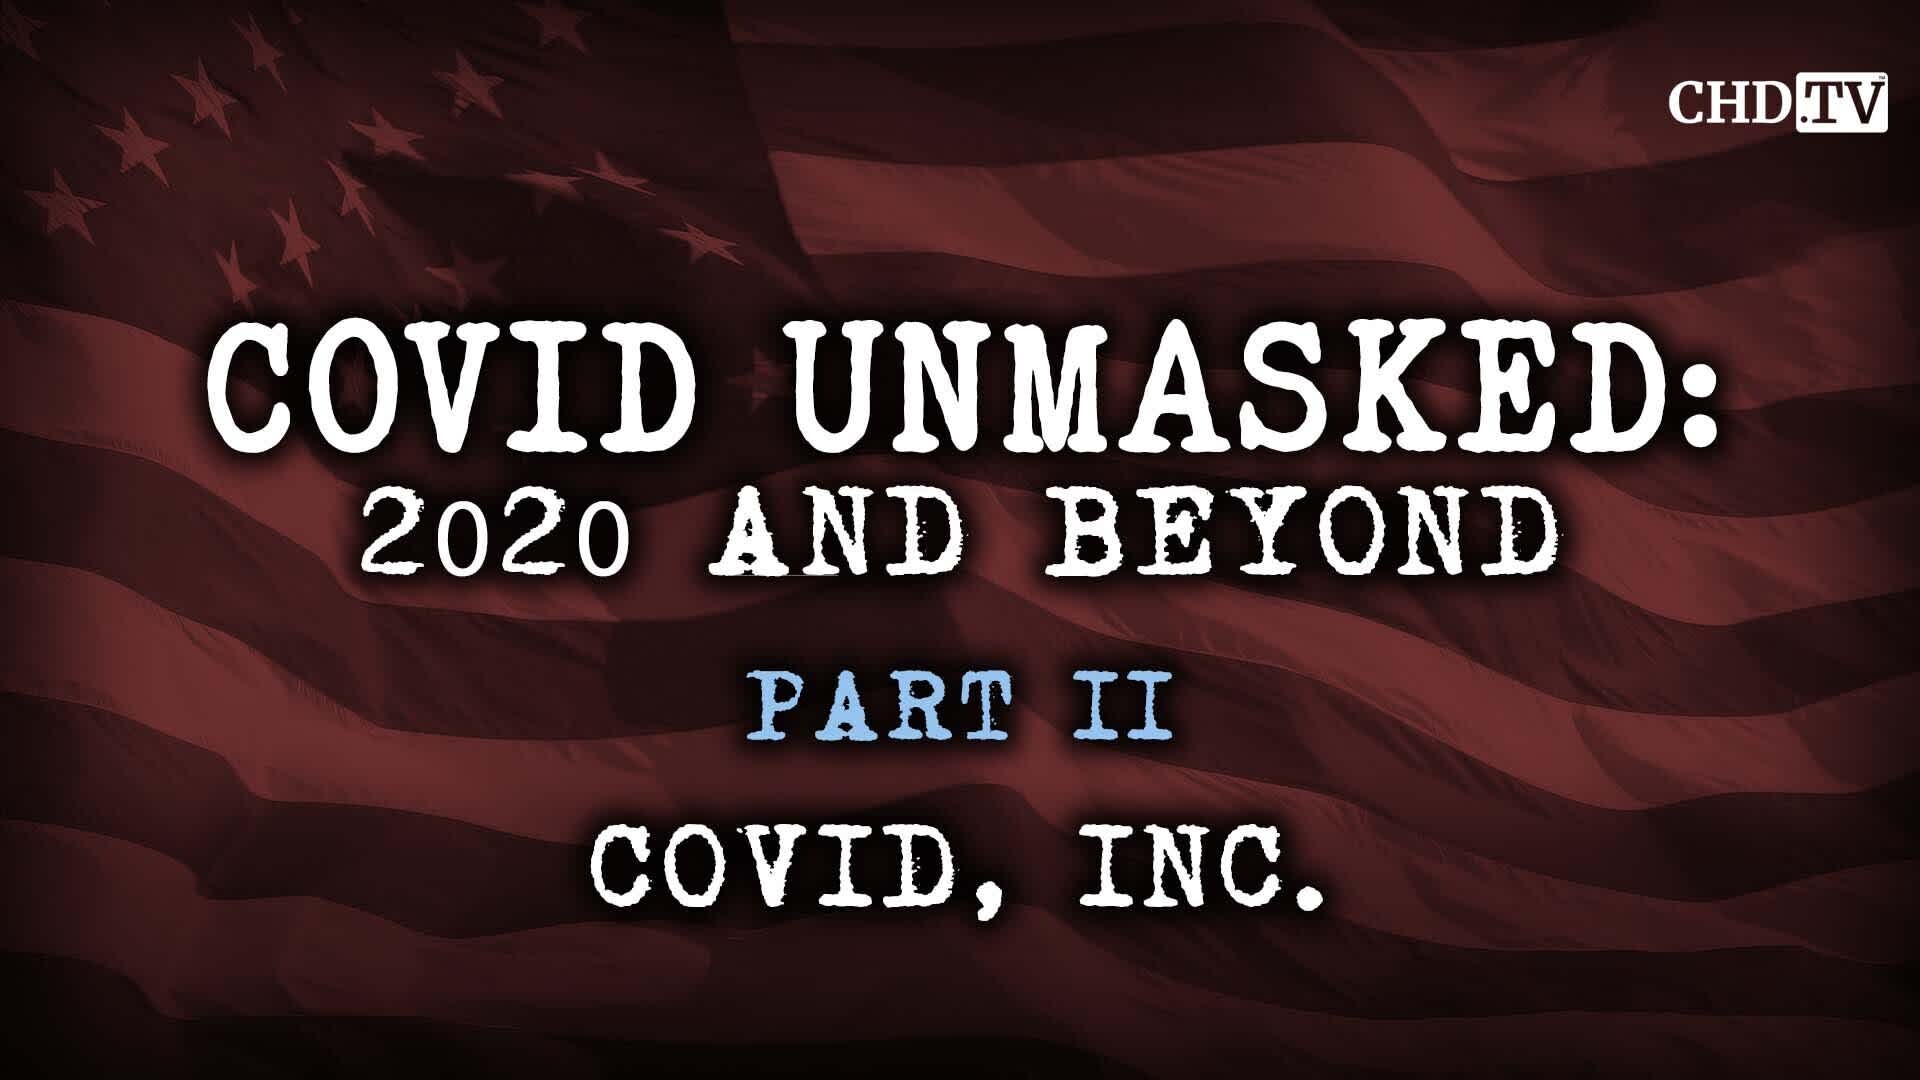 COVID UNMASKED PART 2: COVID, INC.